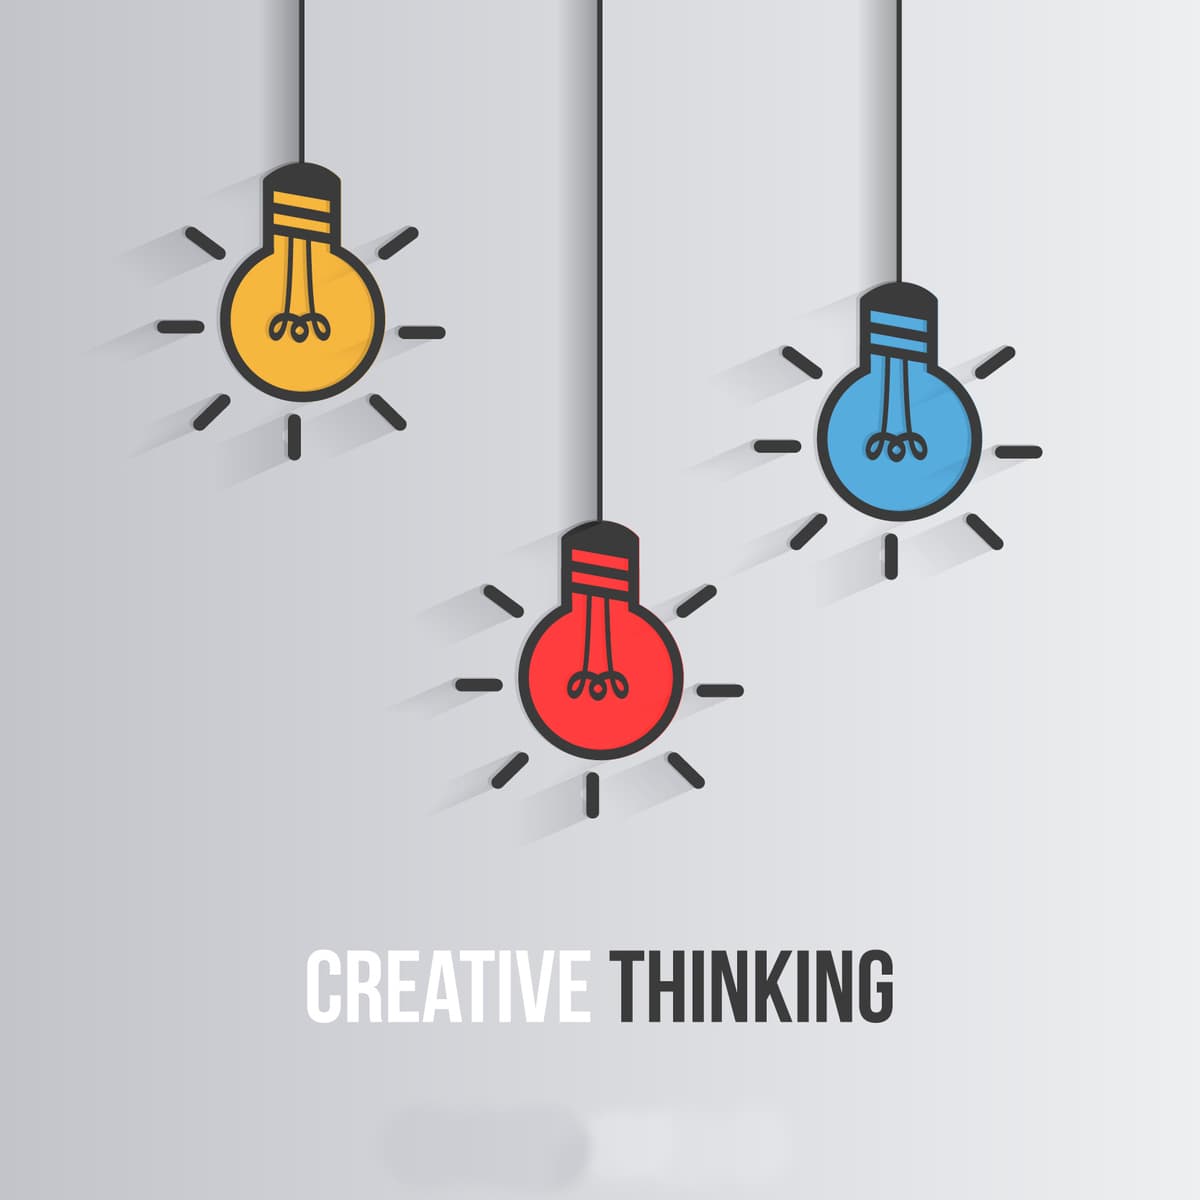 Creative Thinking - Examples, Ways To Improve Your Creative Thinking